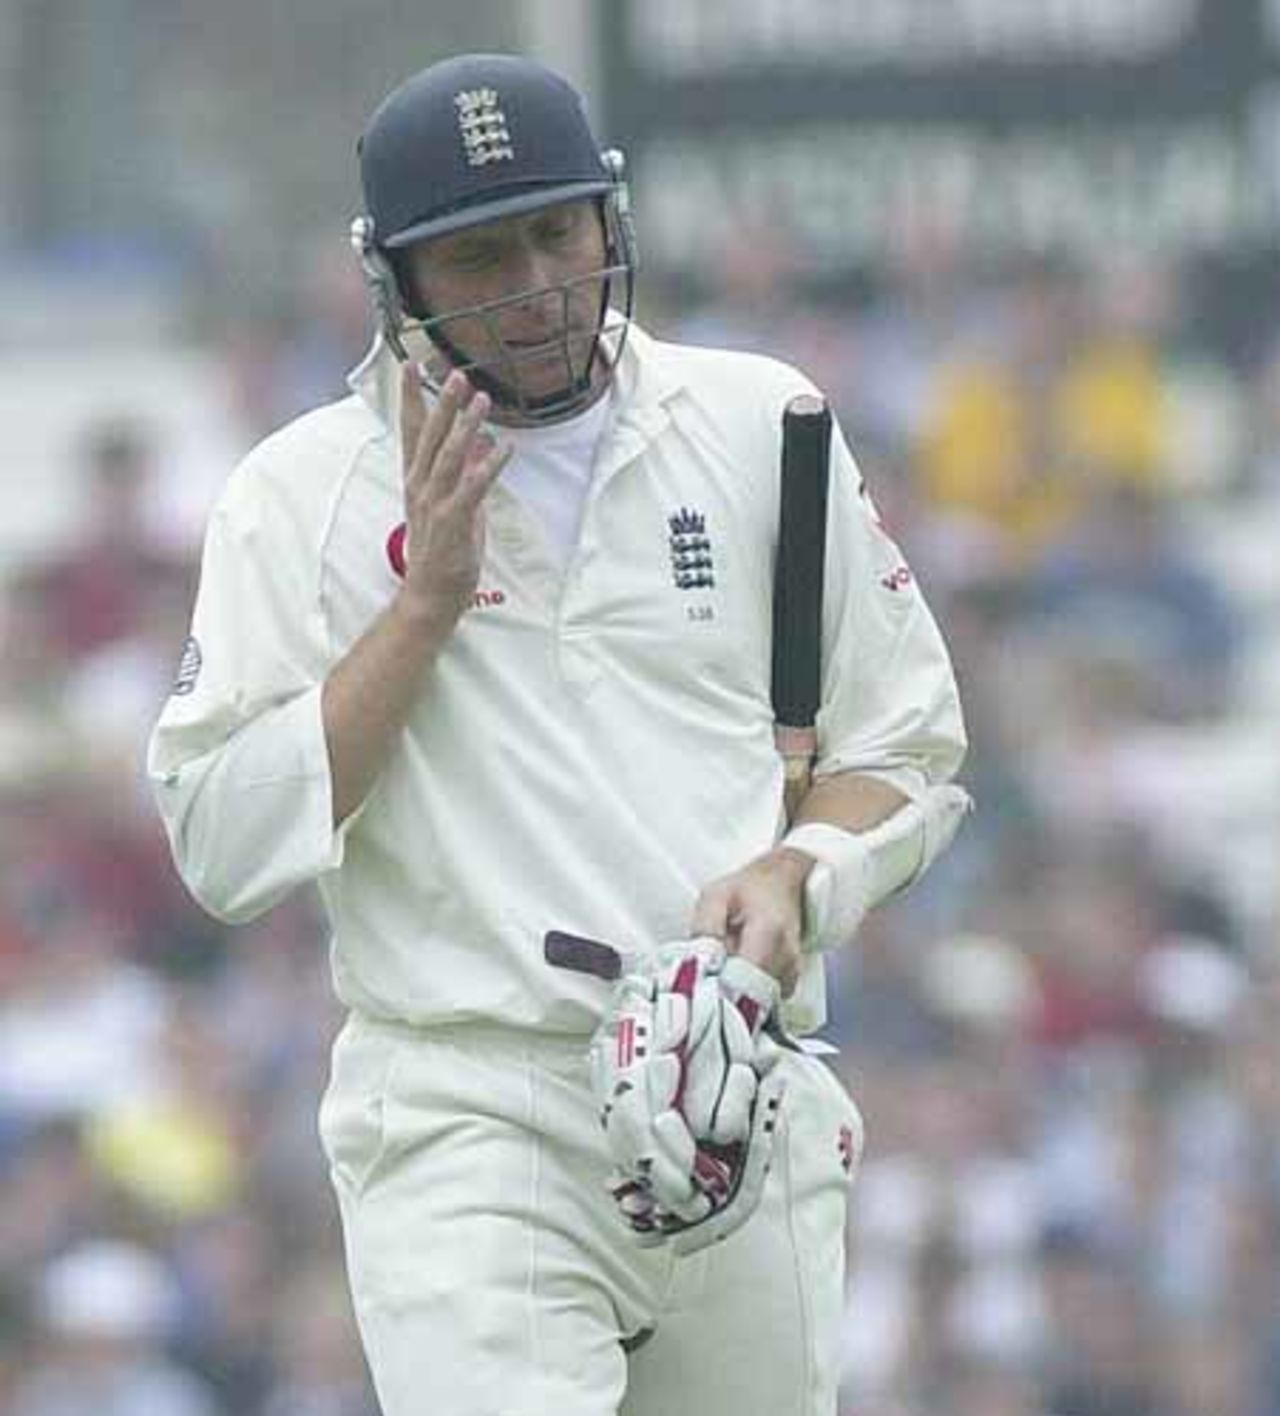 Mike Atherton leaves the Oval field for probably the last time as an England bat after his second innings of 9, fifth npower Test, Day 4, The Oval, 26 August 2001